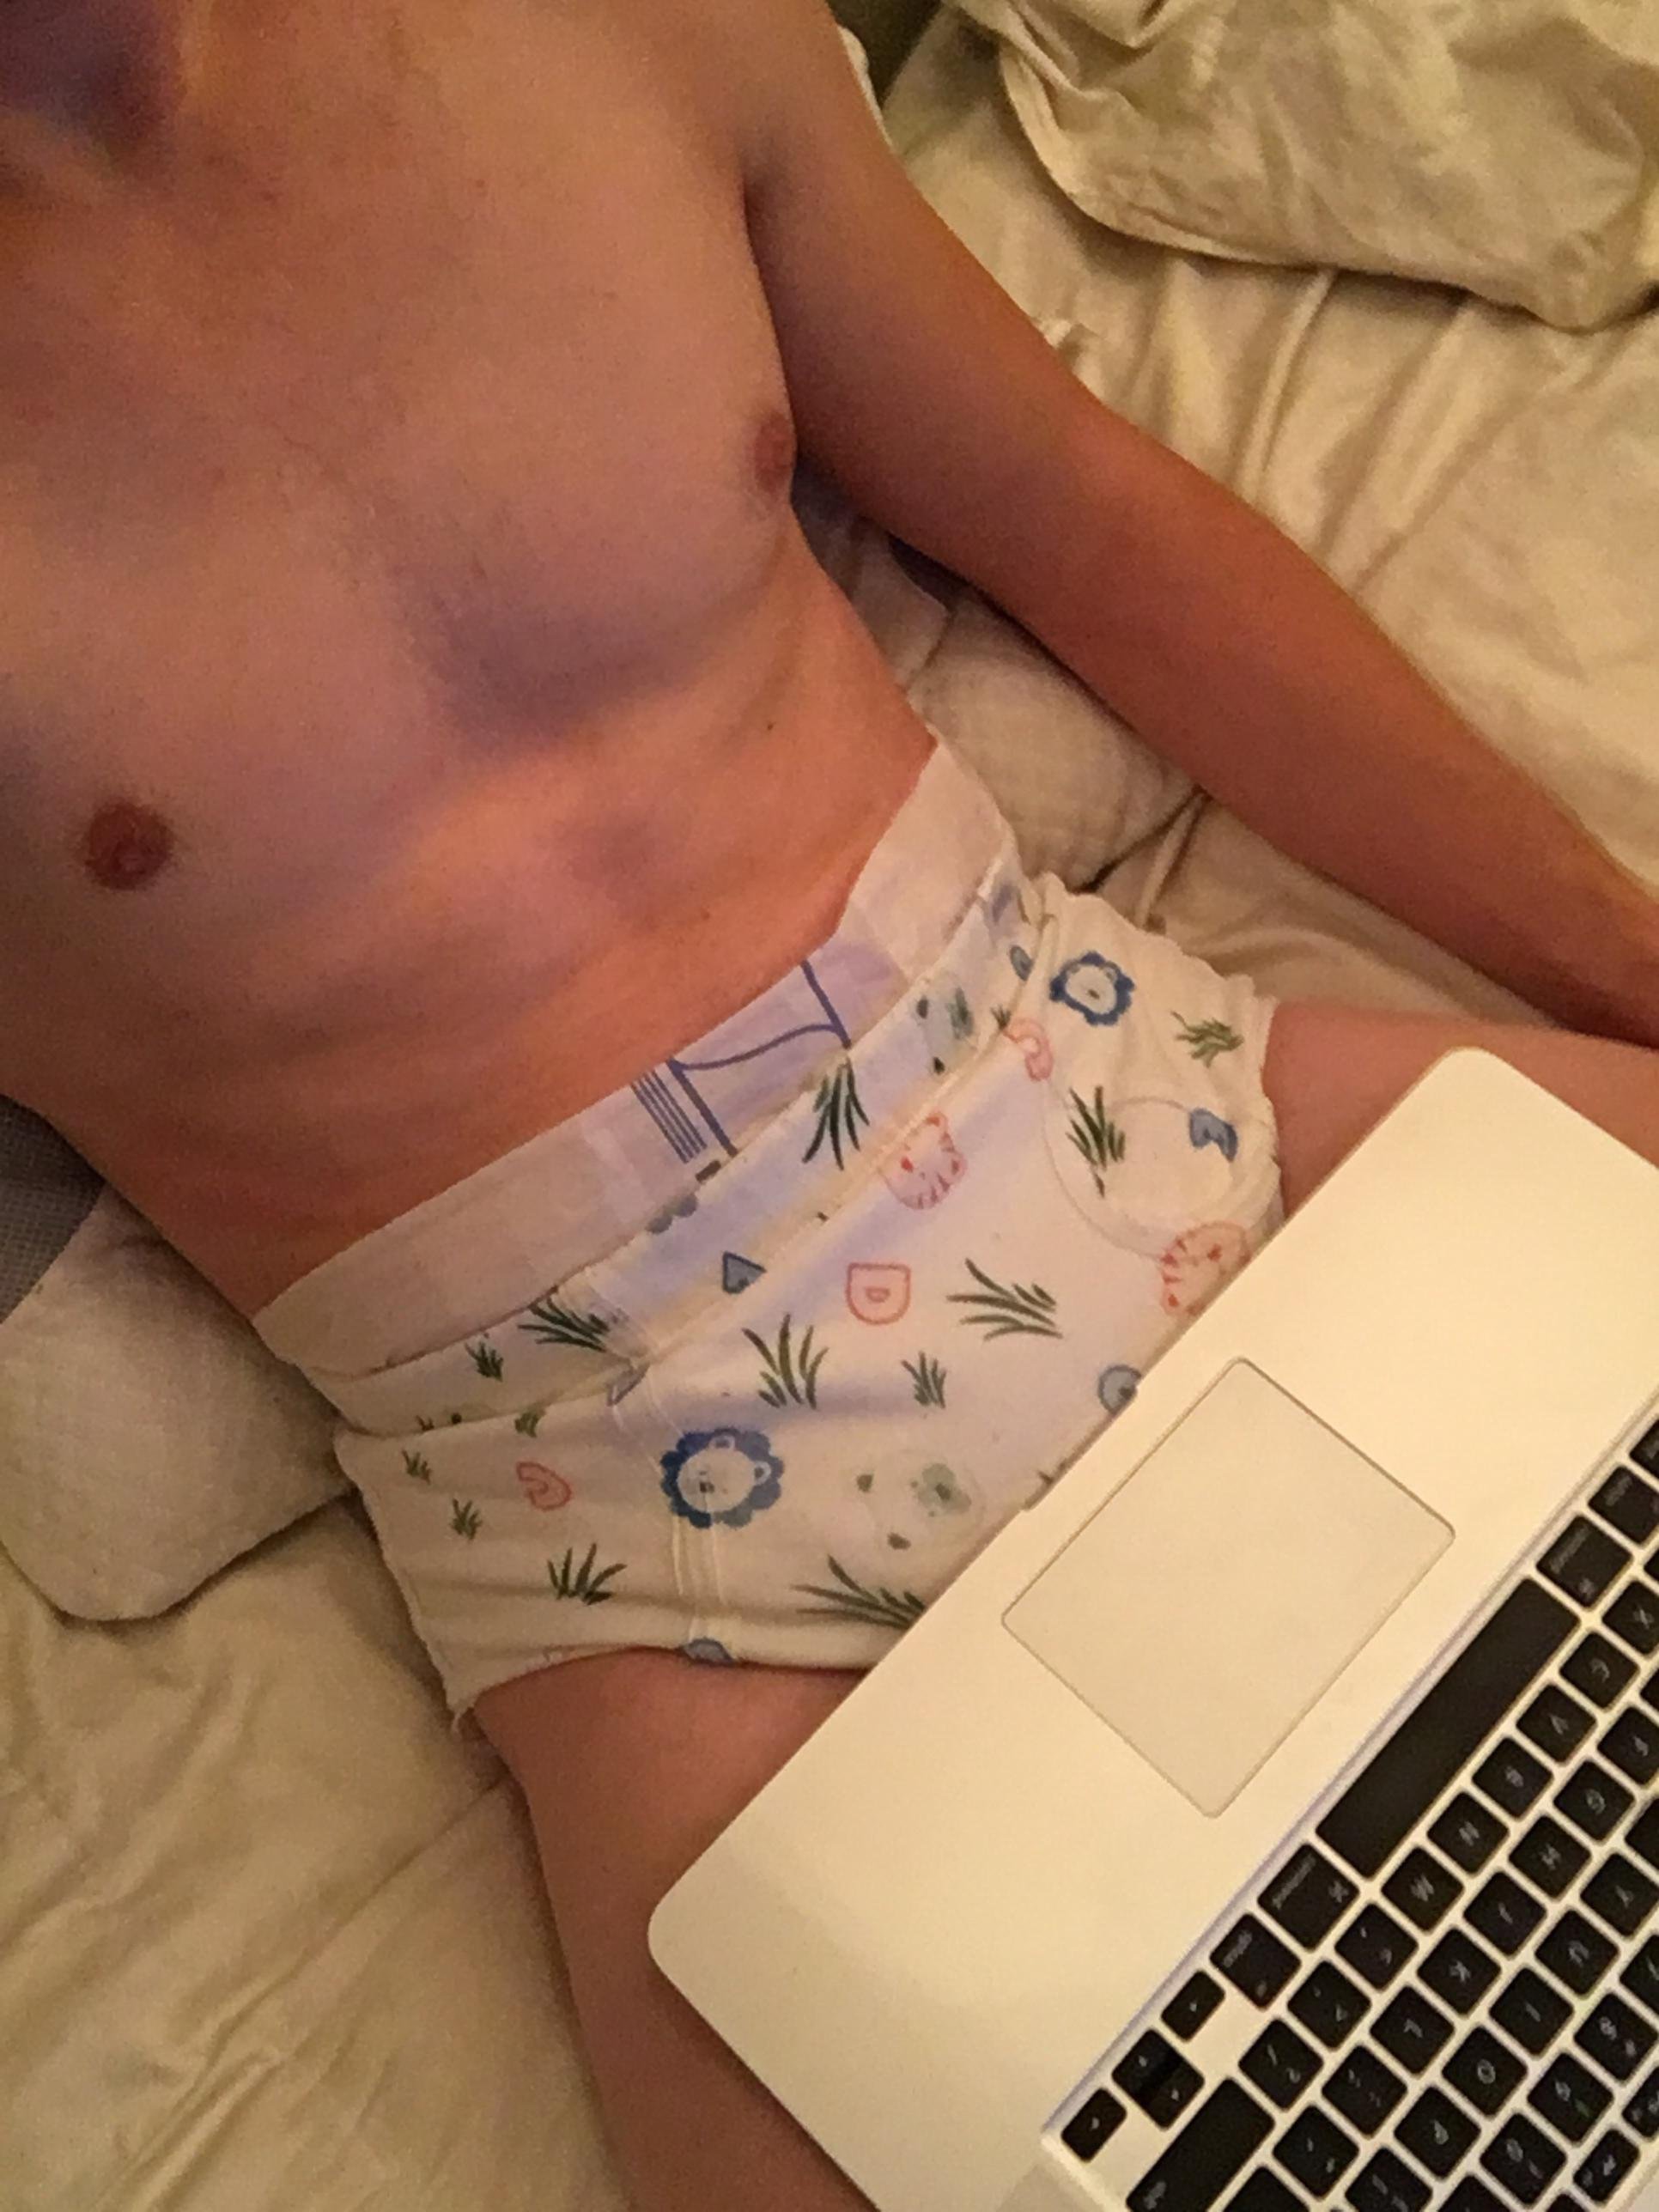 Hello! I'm new to Reddit, but not to diapers